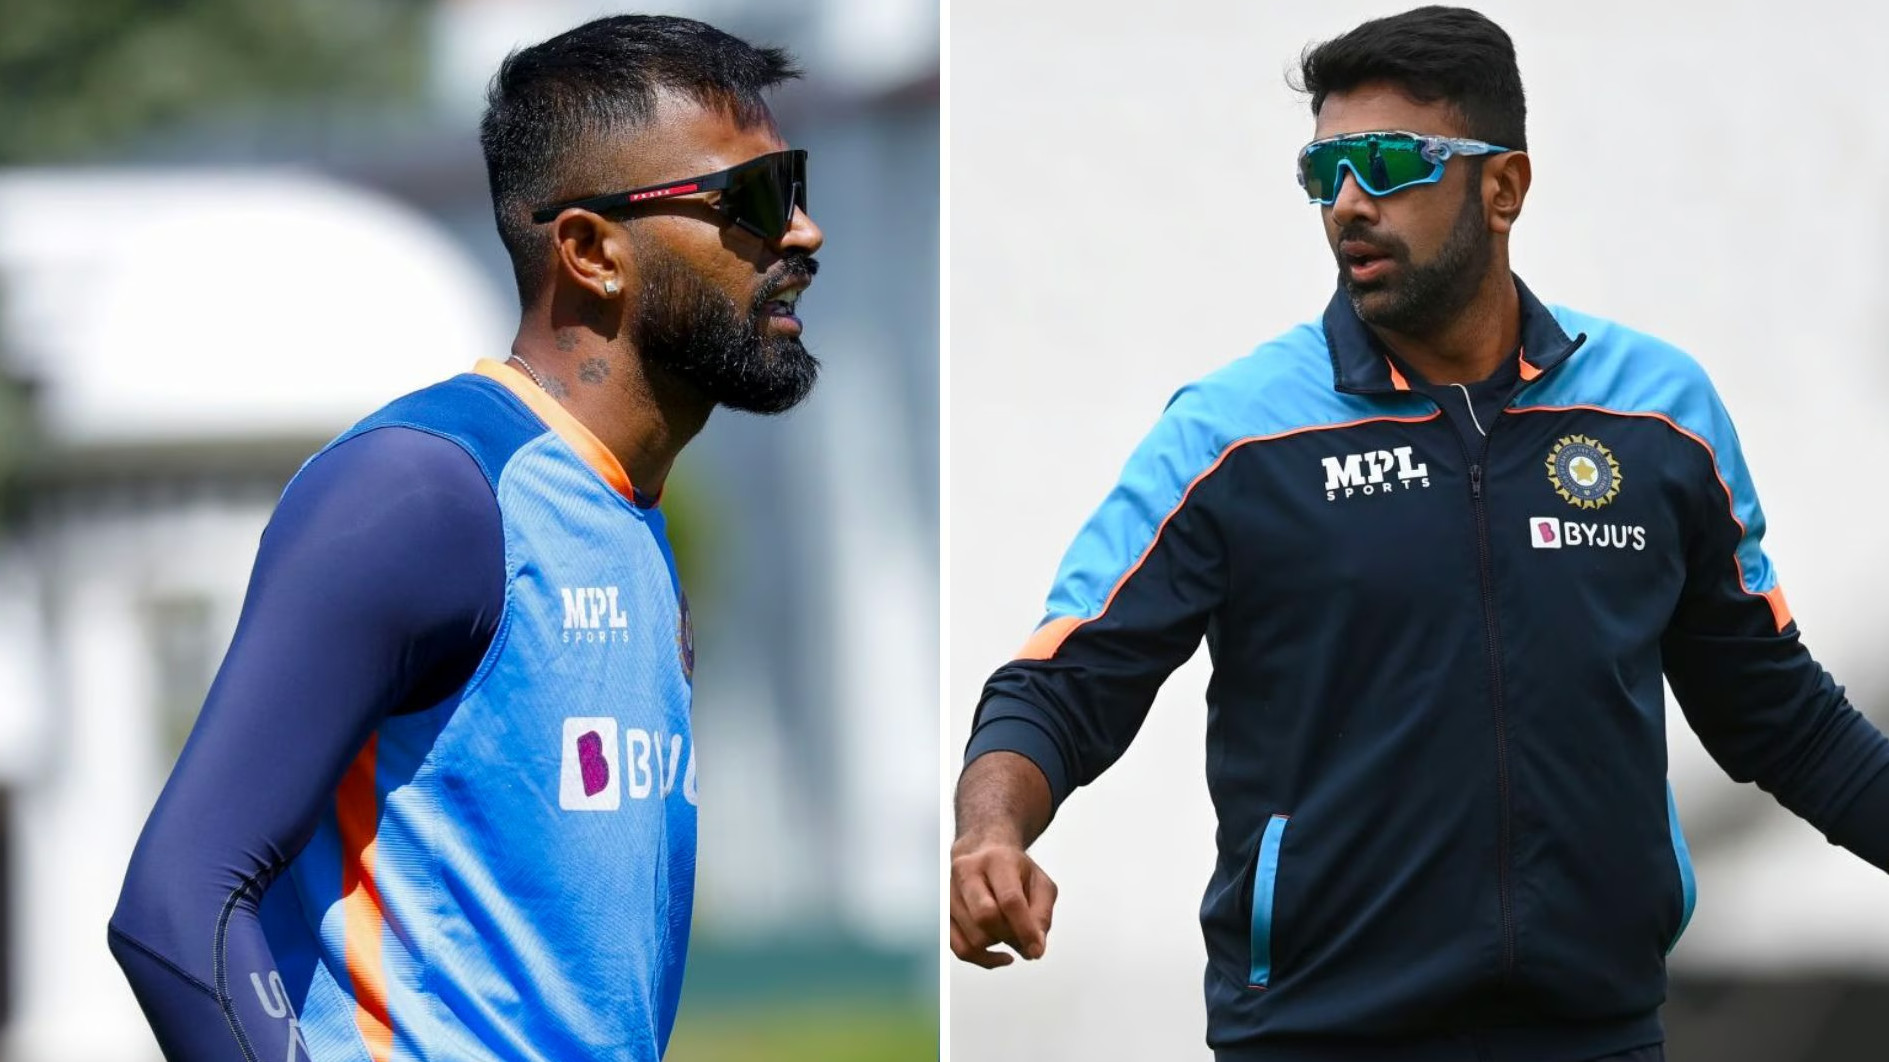 “Hats off to Hardik Pandya”- R Ashwin lauds all-rounder’s admission of being not ready to play Tests yet